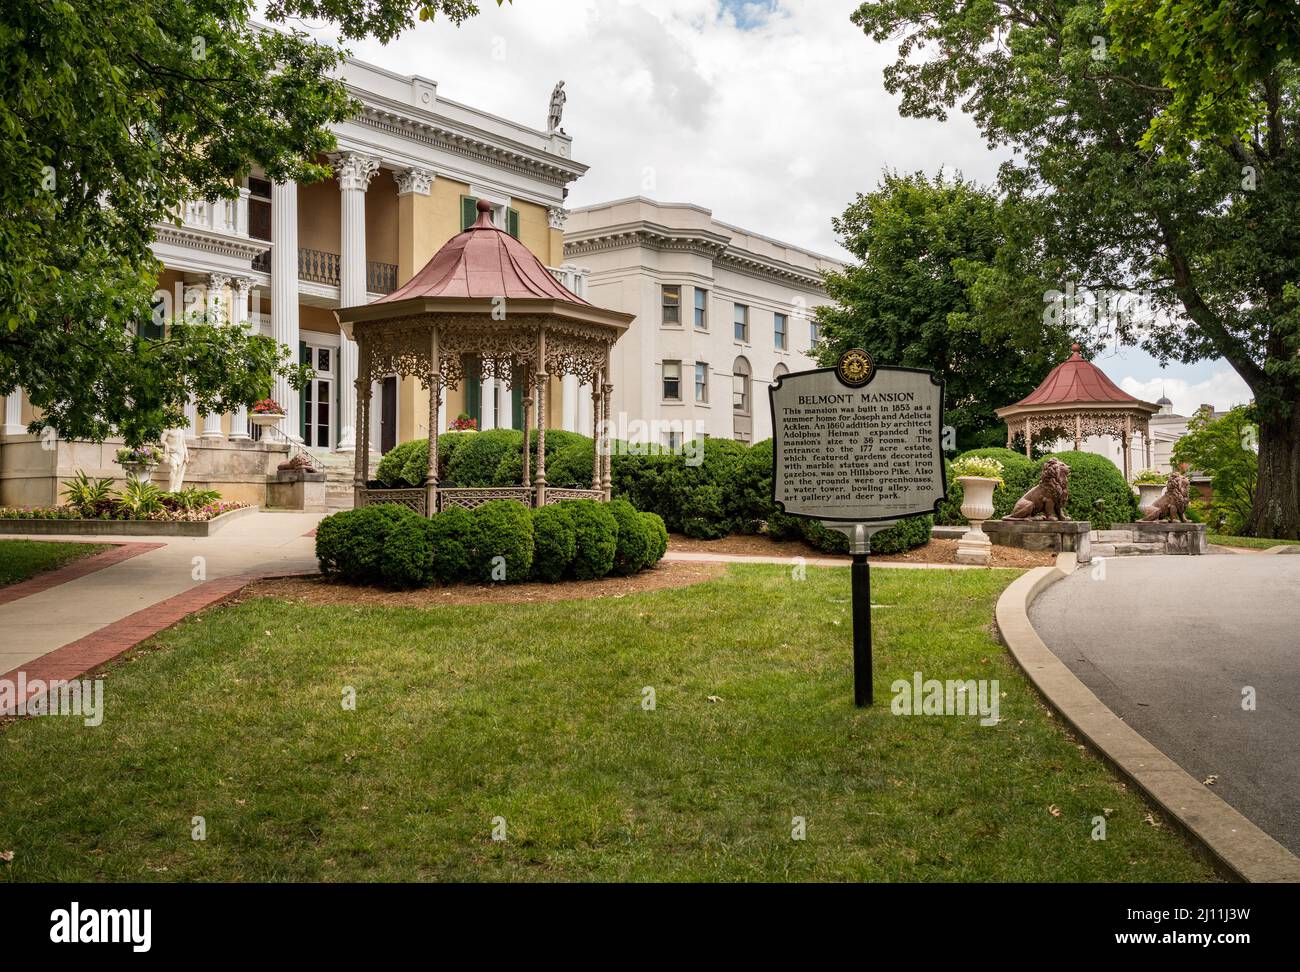 Nashville, Tennessee - 28 June 2021: Exterior of historic Belmont Mansion, now used as a liberal arts college in Nashville Tennessee Stock Photo